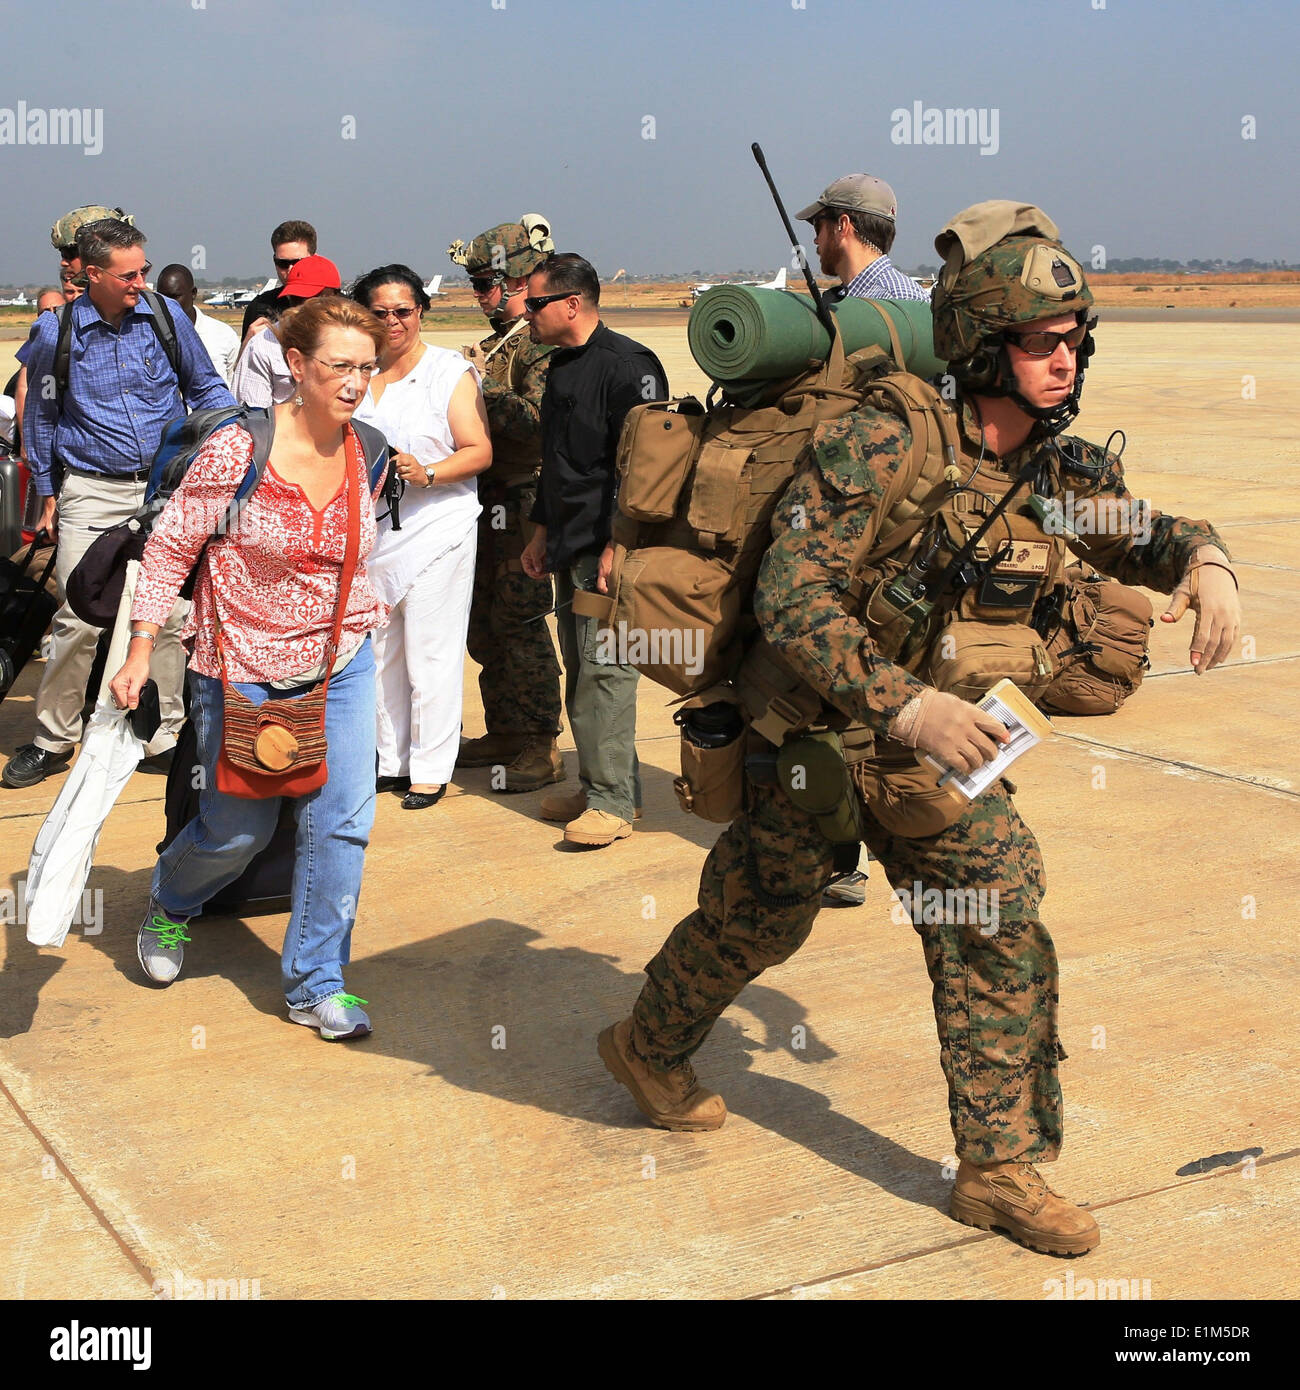 A U.S. Marine, right, assigned to Special Purpose Marine Air-Ground Task Force Crisis Response, guides U.S. citizens on a fligh Stock Photo